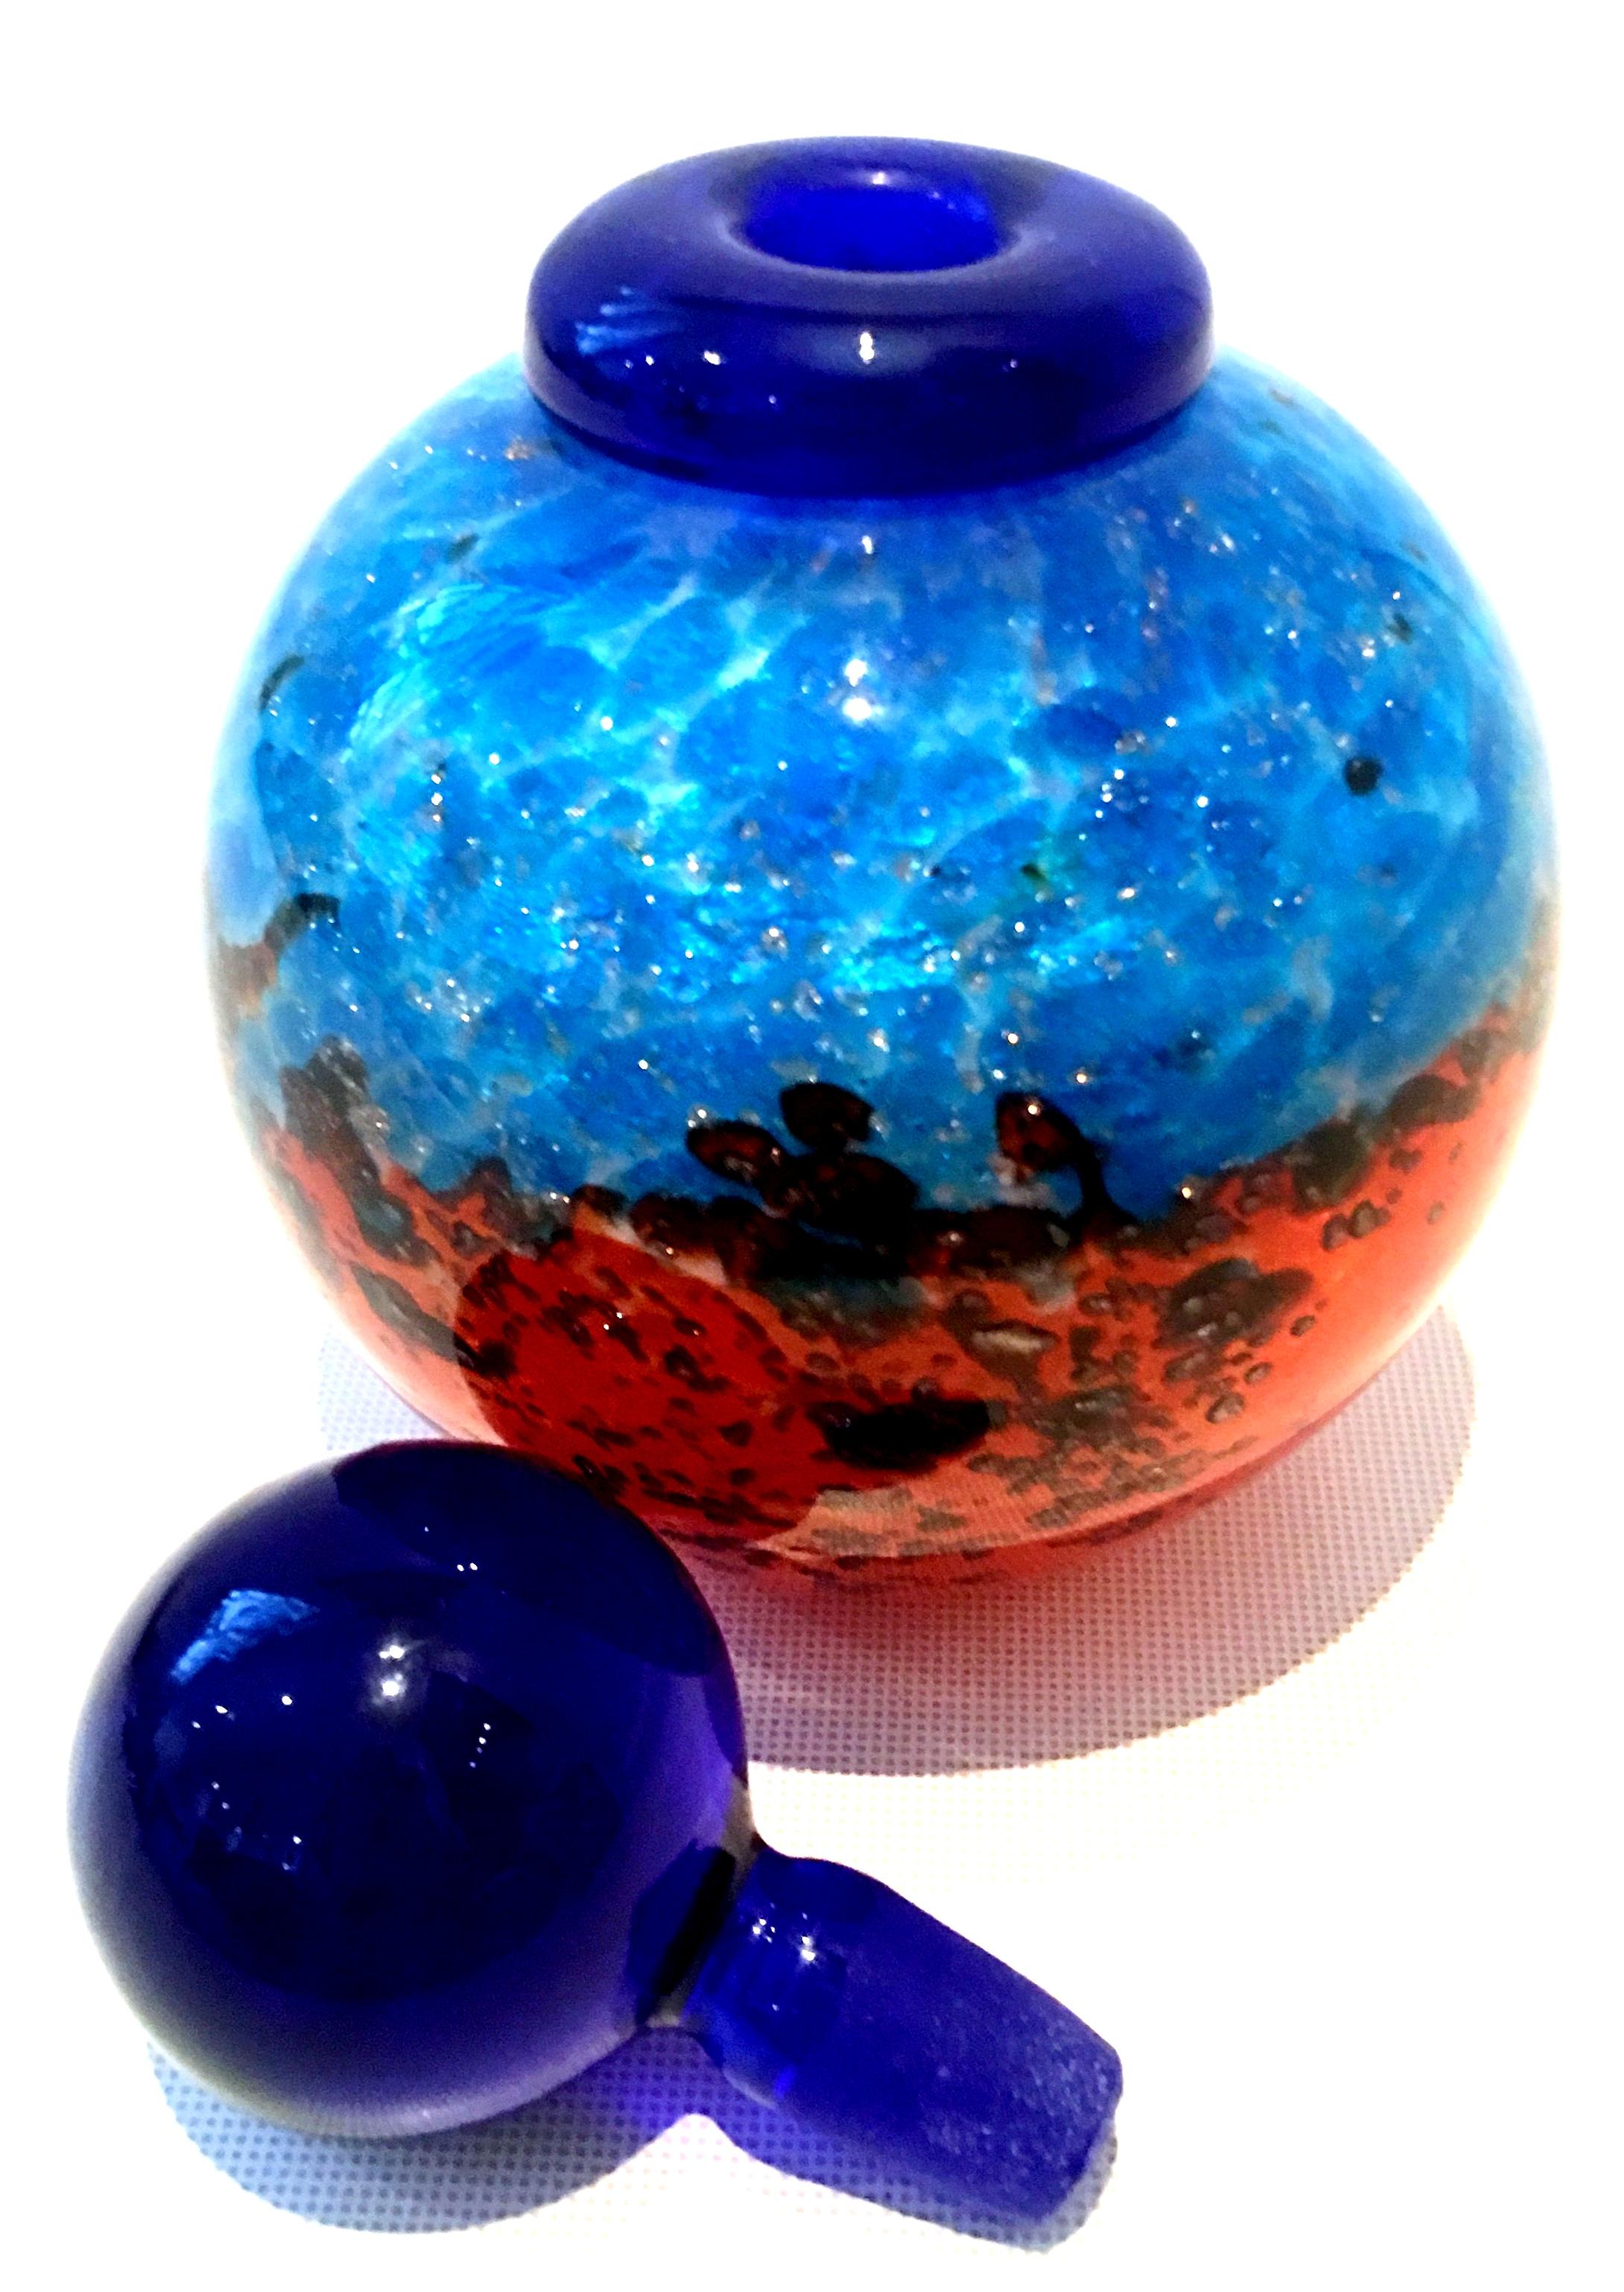 20th century artist signed art glass & 22-karat gold fleck perfume decanter with stopper. This fine handcrafted, one of a kind blown art glass perfume decanter features, a bulbous shape, vivid orange and shades of blue with 22-karat gold fleck